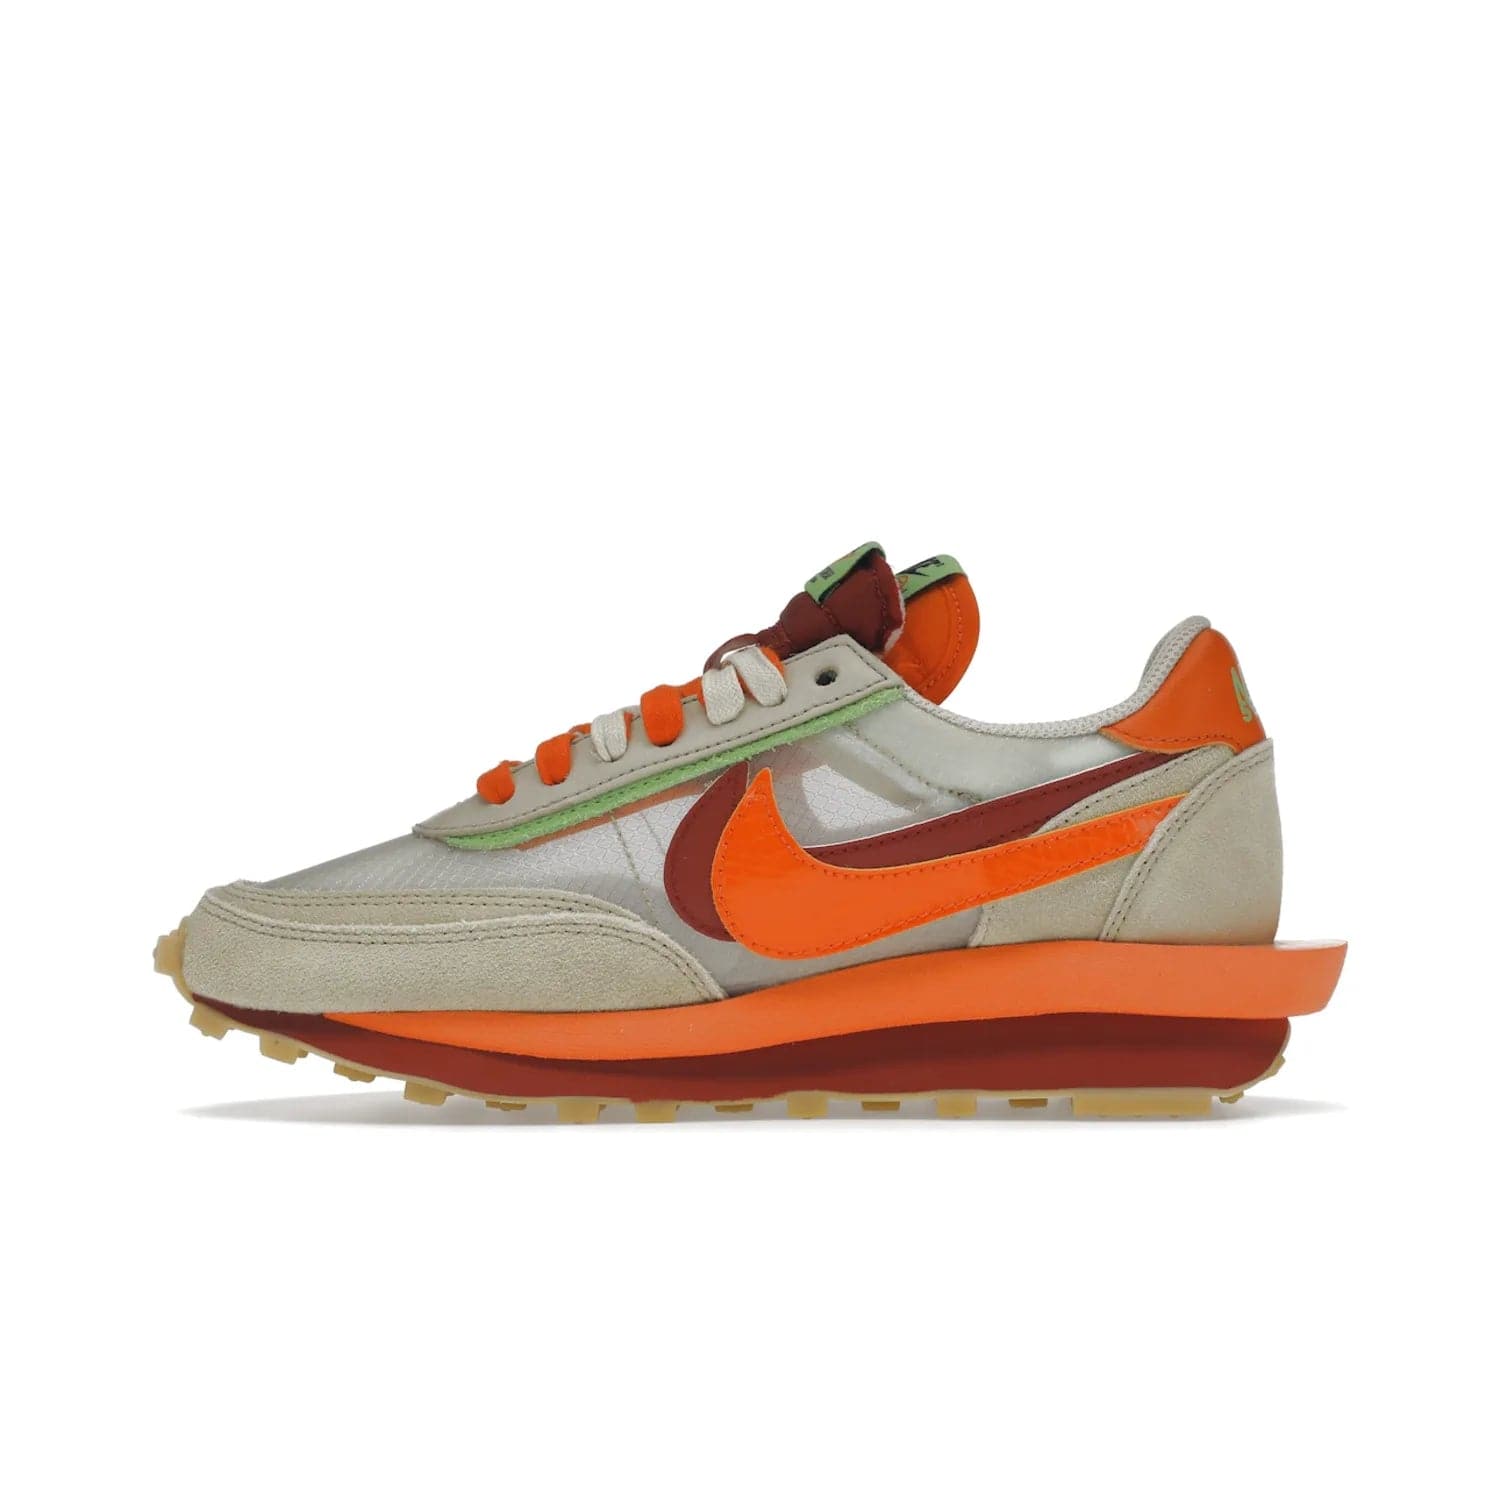 Nike LD Waffle sacai CLOT Kiss of Death Net Orange Blaze - Image 19 - Only at www.BallersClubKickz.com - A bold and stylish Nike LD Waffle sacai CLOT Kiss of Death Net Orange Blaze sneaker featuring a unique off-white, Deep Red & Orange Blaze Swooshes, two-toned stacked sole and doubled tongue. Available in September 2021. Make a statement.